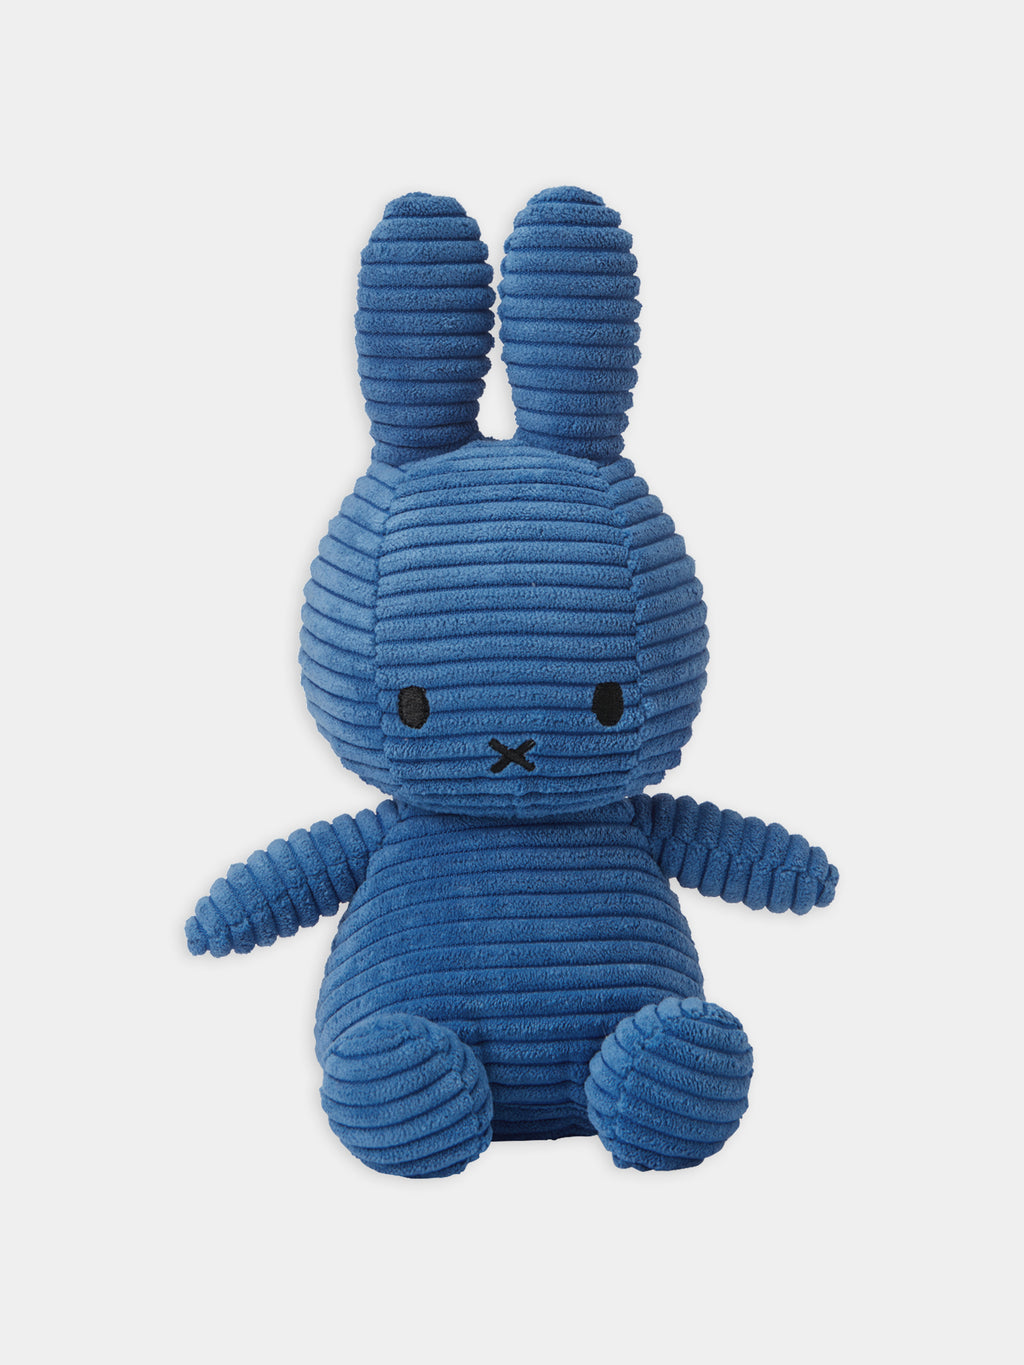 Blue plush toy for kids